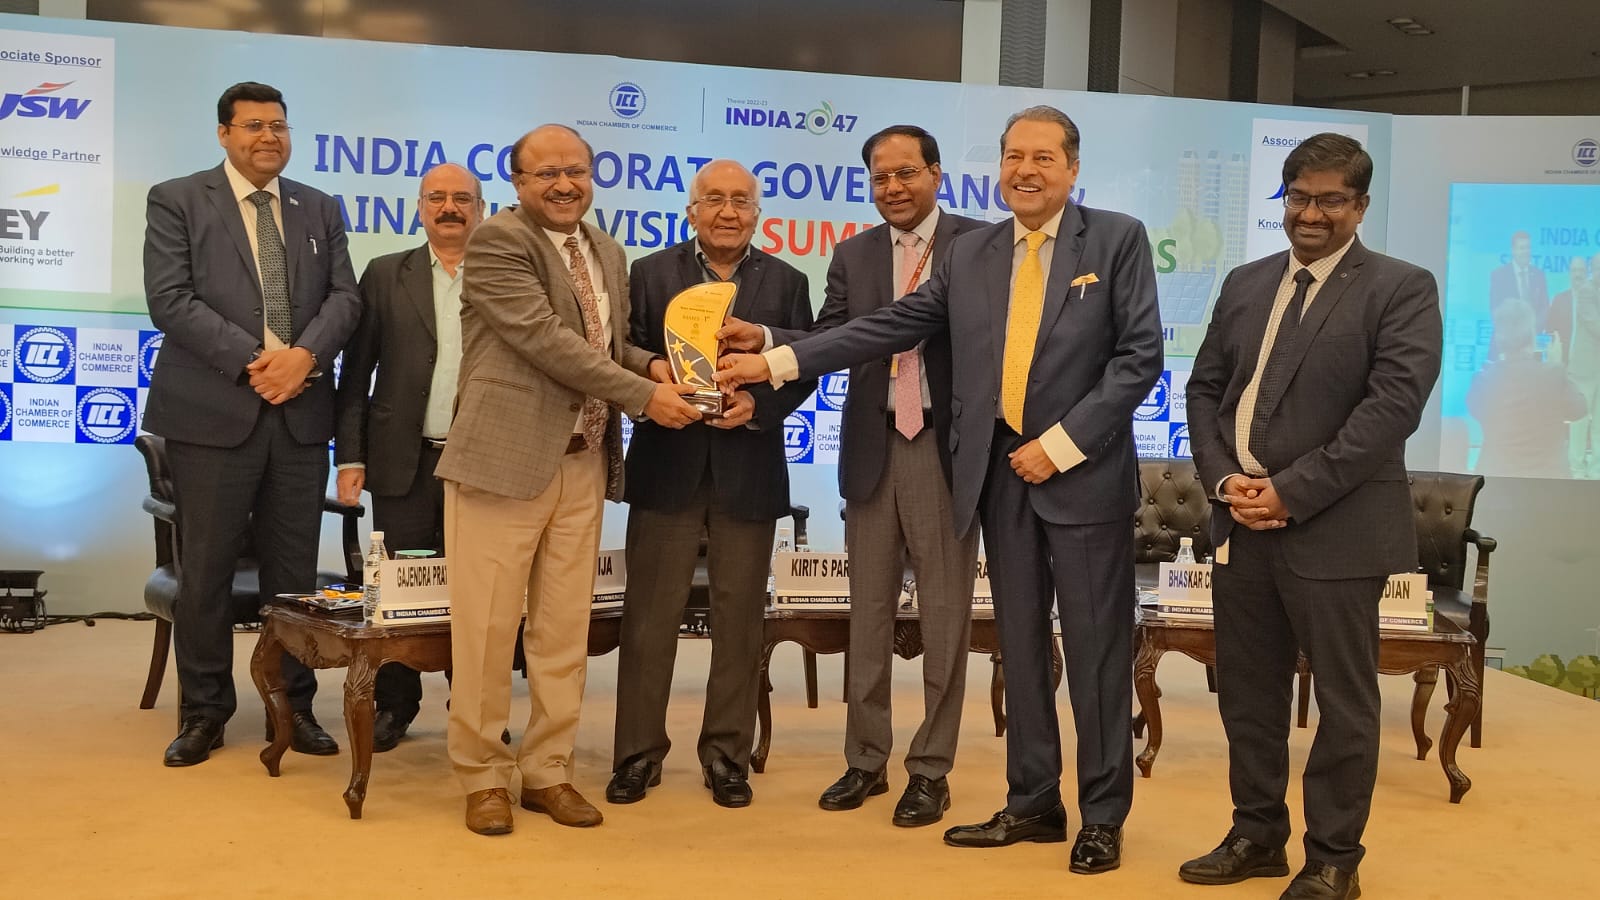 BPCL has been conferred the prestigious Indian Chamber of Commerce Awards